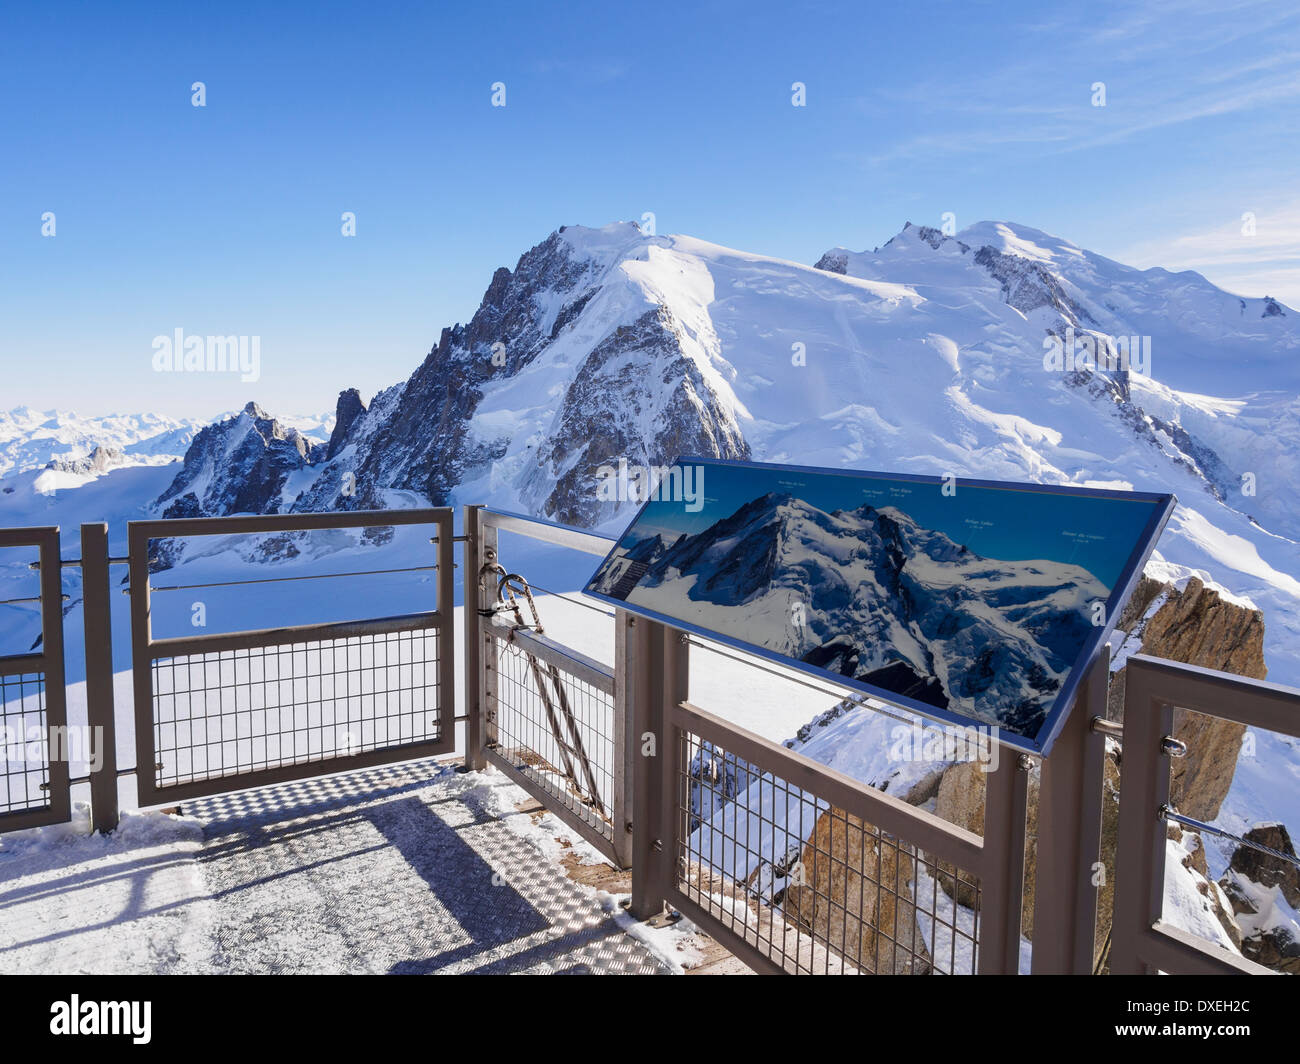 Viewing platform and information sign for Mont Blanc massif on Aiguille du Midi in Graian Alps Chamonix-Mont-Blanc France Europe Stock Photo